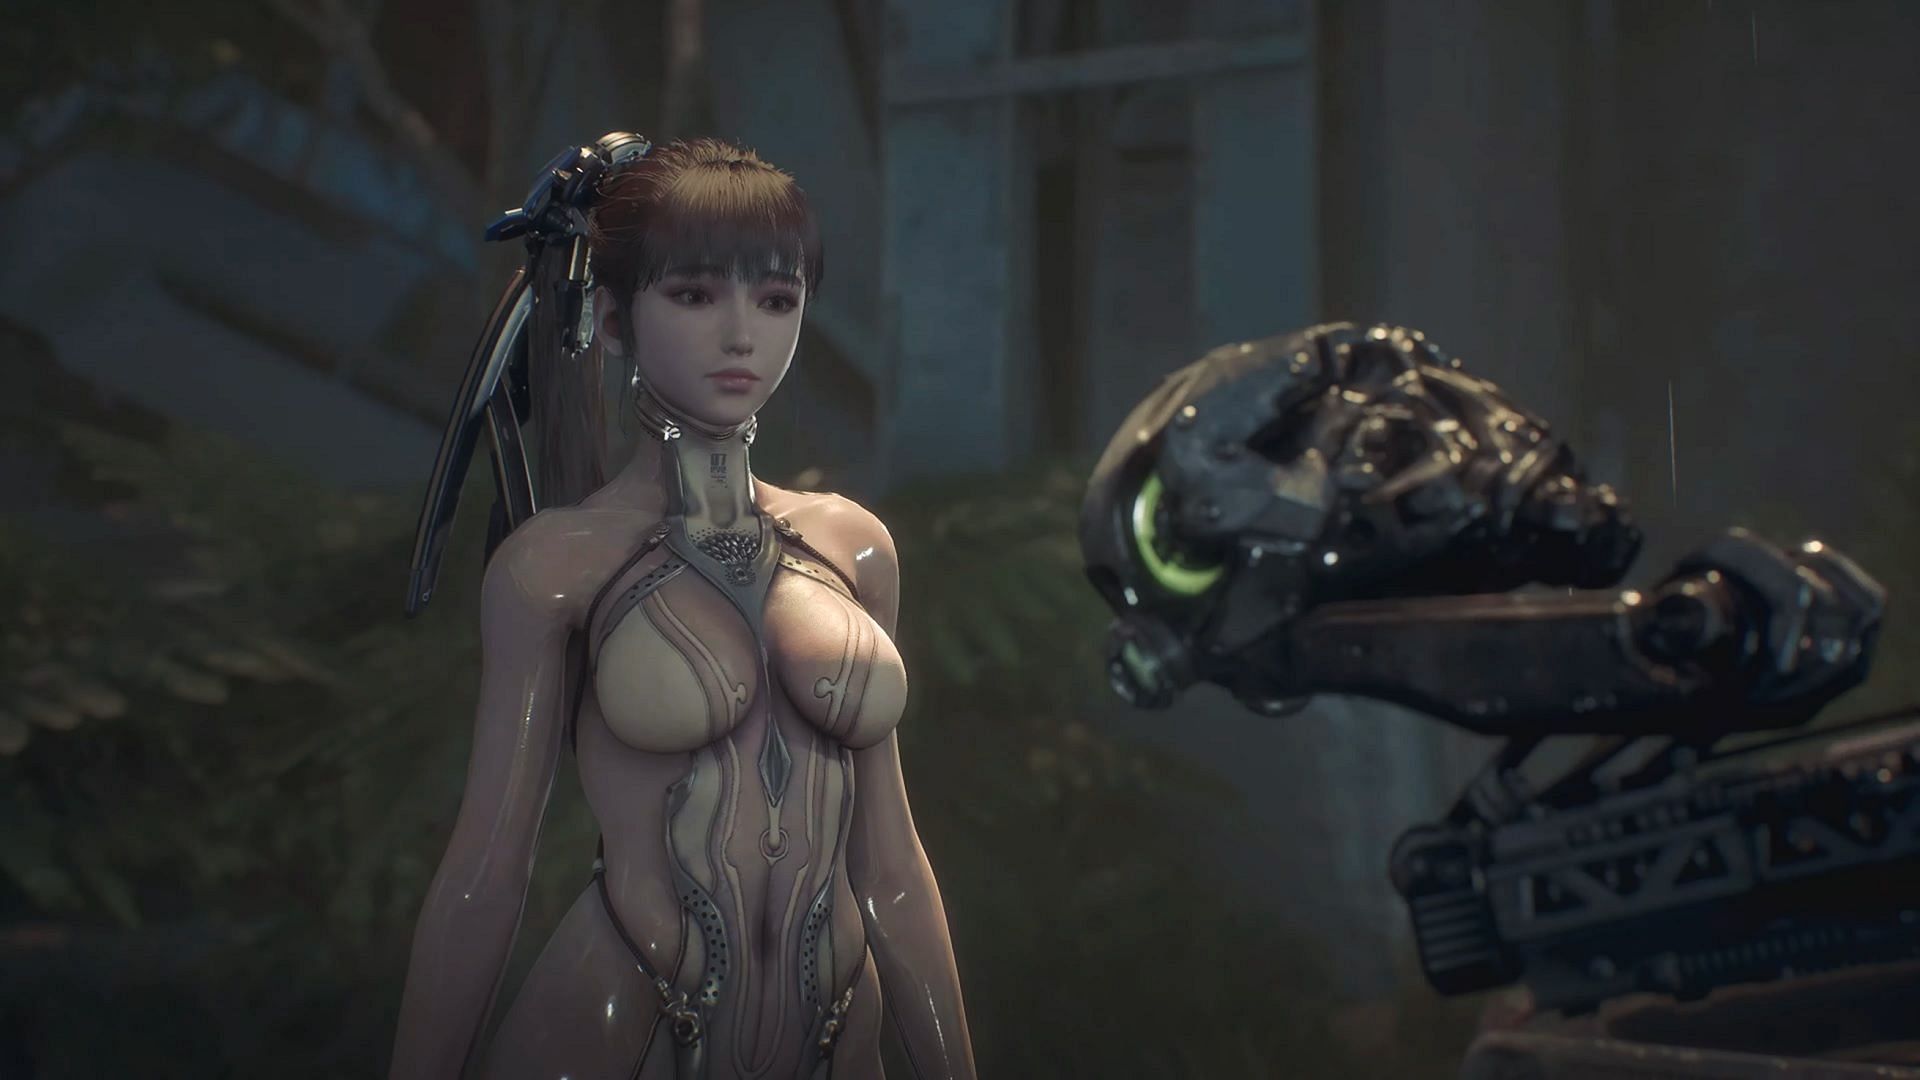 Eve as seen in the game (Image via Sony Interactive Entertainment)